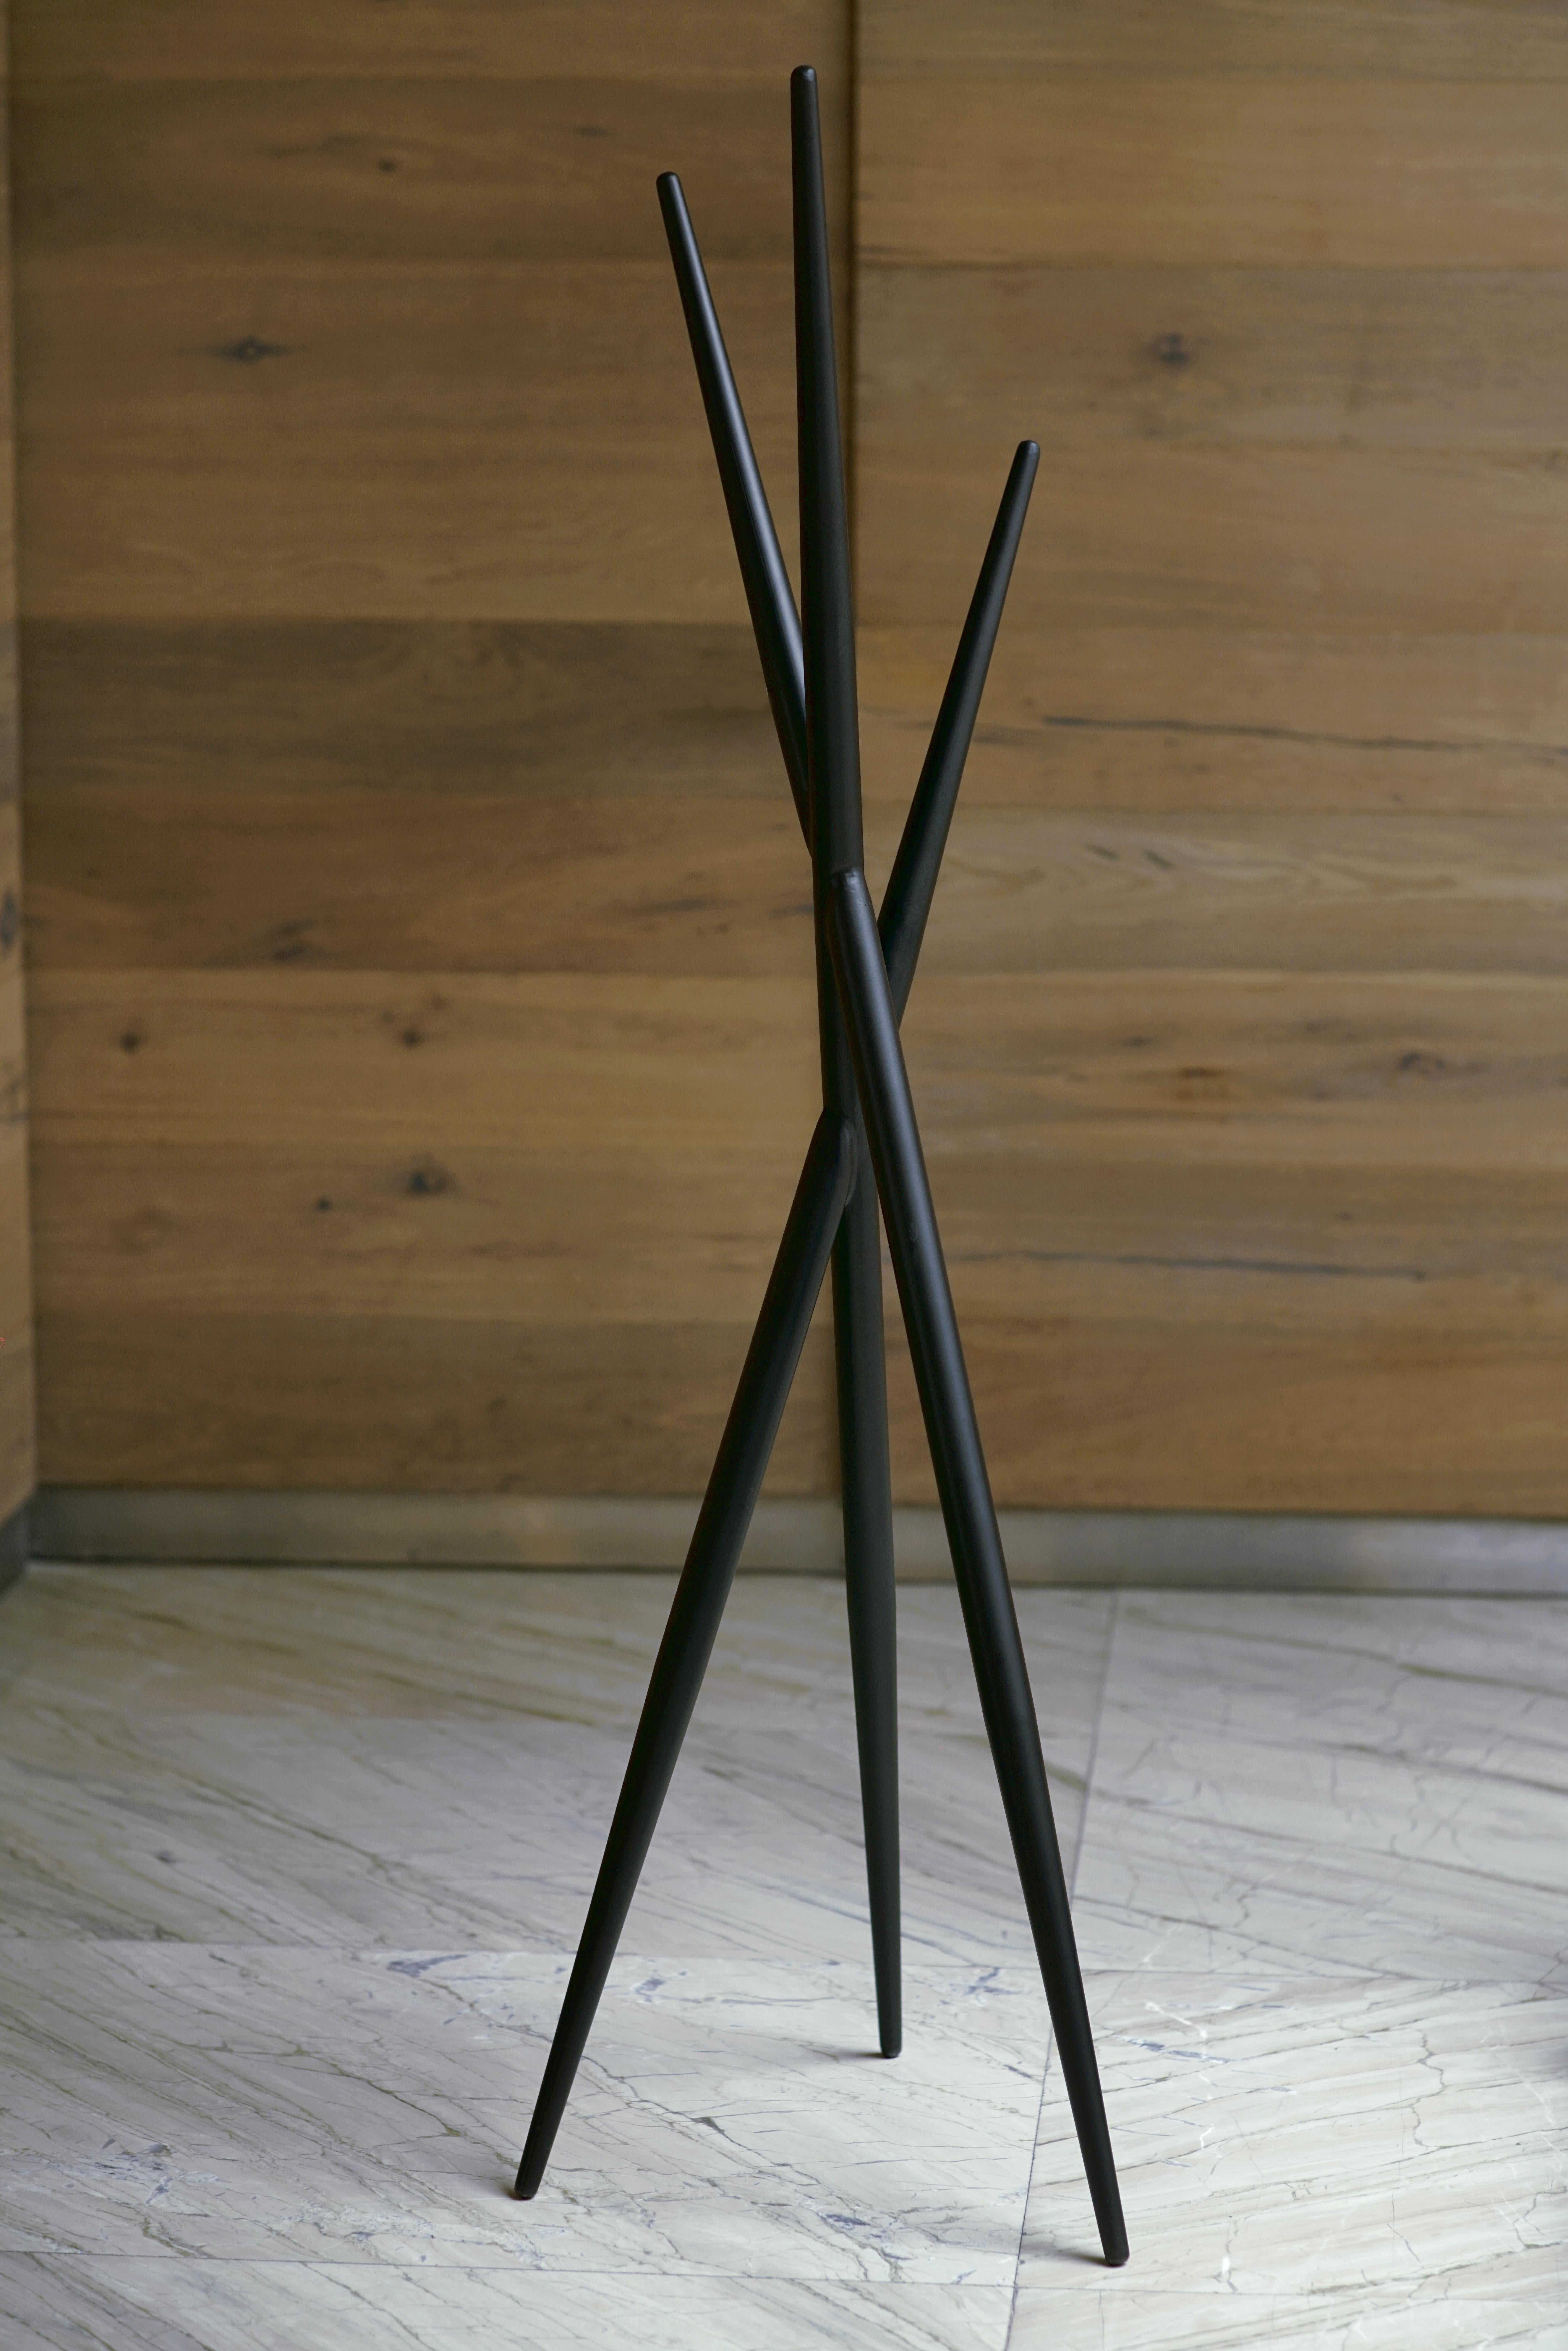 Coat rack 160. Simple, geometrically strong, made of metal electrostatically painted. The rack consists of 3 conical metal tubes intersecting and supporting each other. Available in 160cm high.